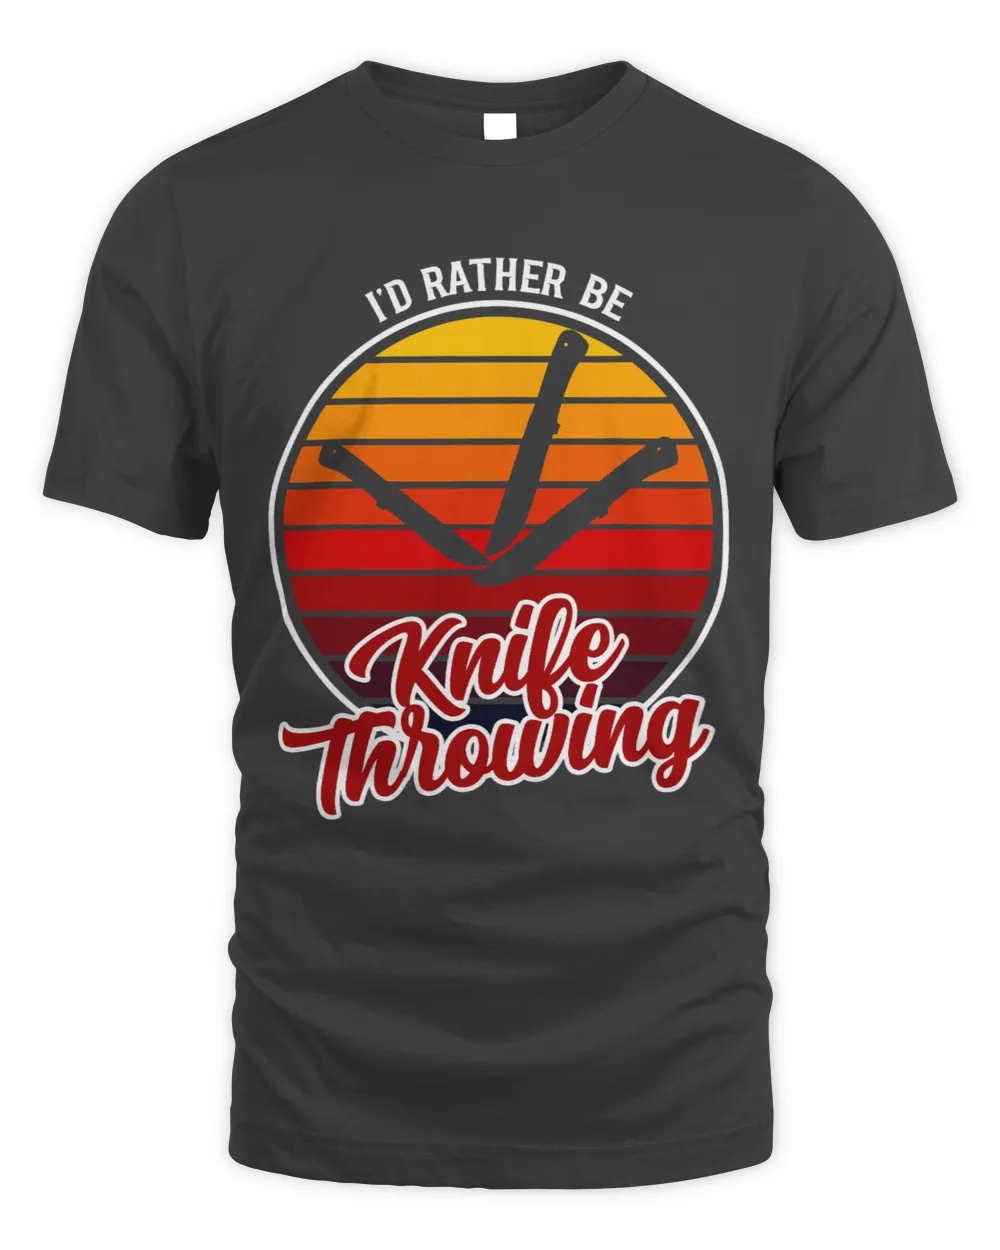 Id Rather Be Knife Throwing Clothing Funny Knife Throwing